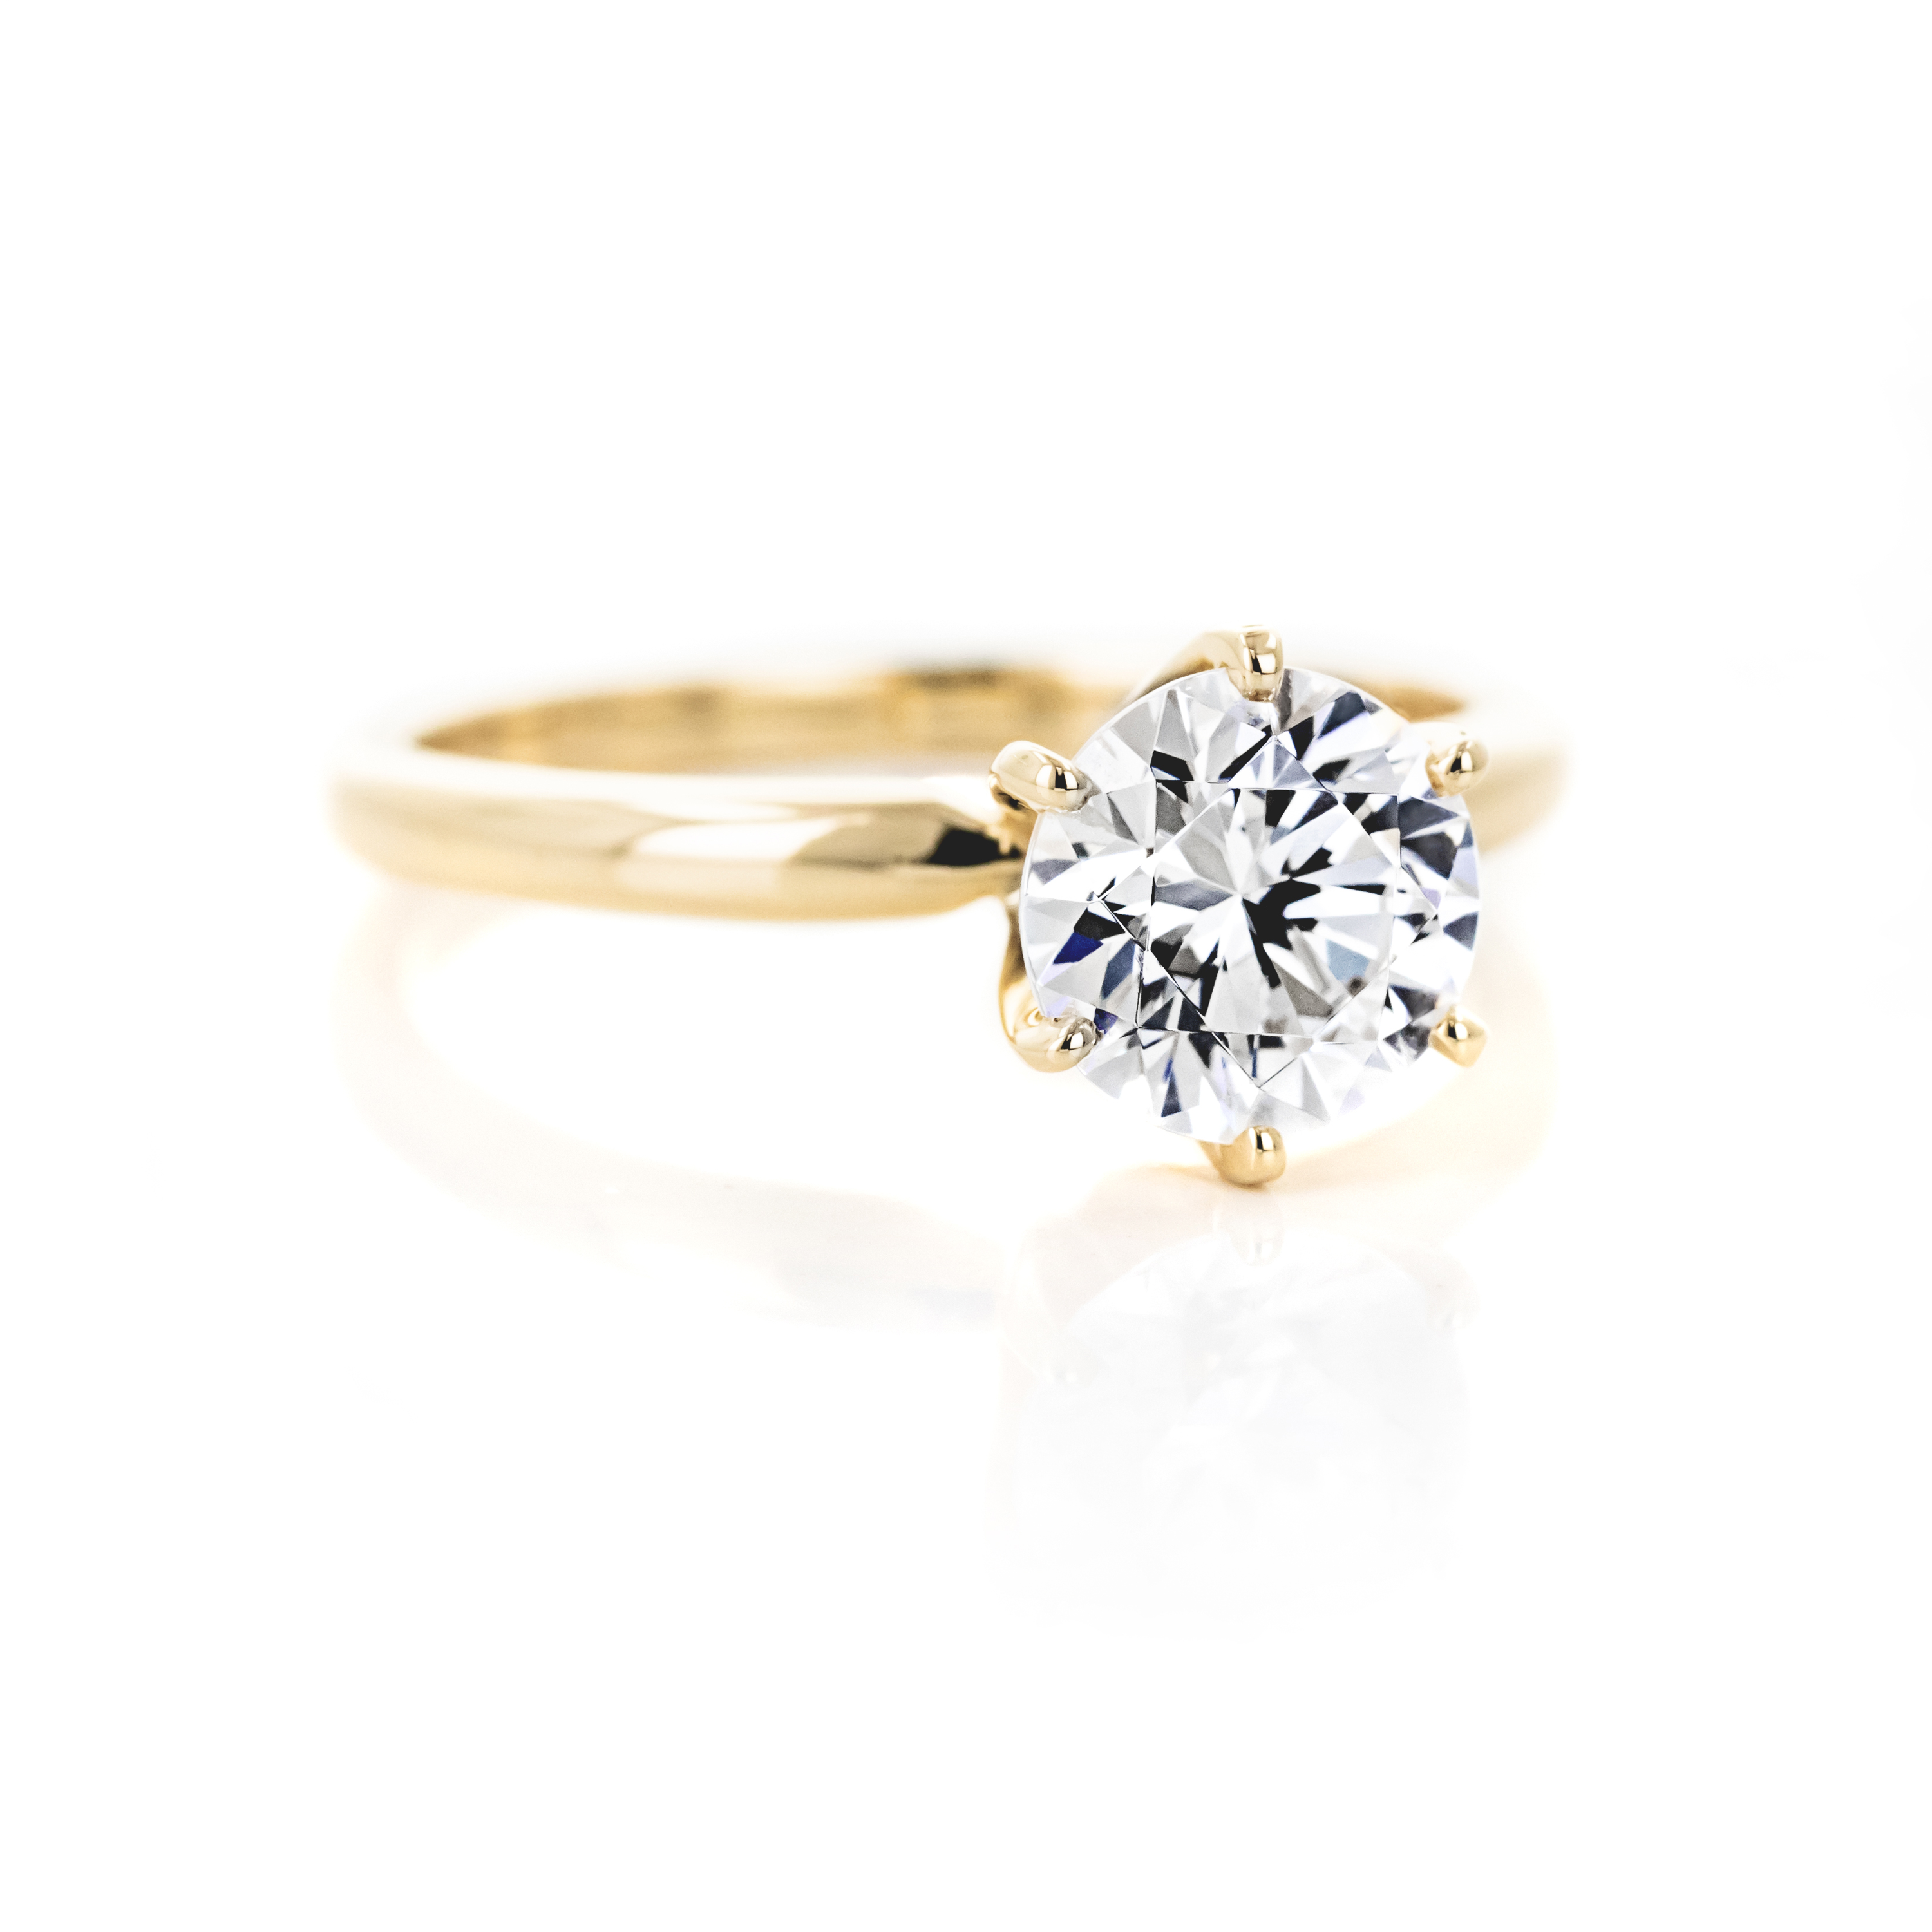 Engagement ring which can be built with either diamond hybrid simulant or lab created diamond